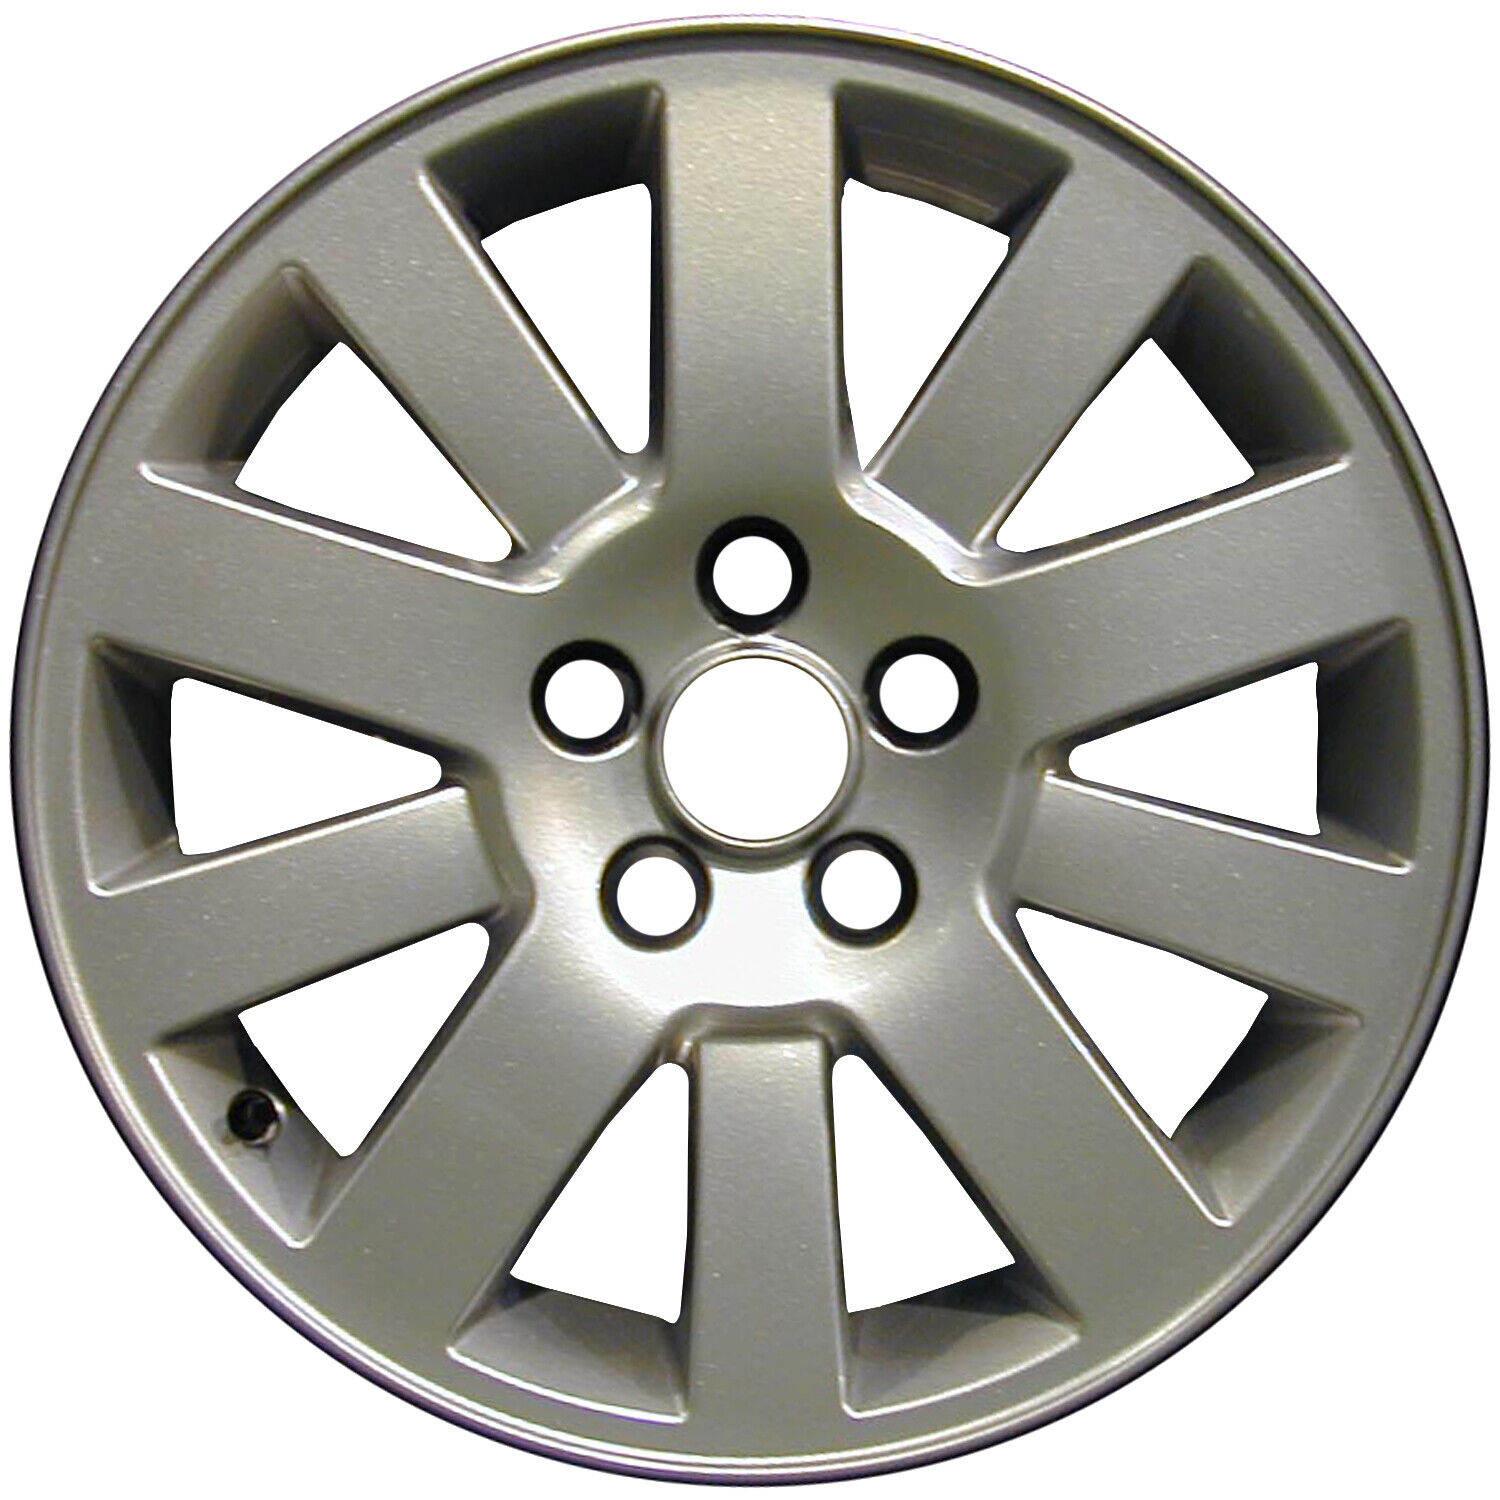 72190 Reconditioned OEM Aluminum Wheel 18x8 fits 2005-2008 Land Rover LR3